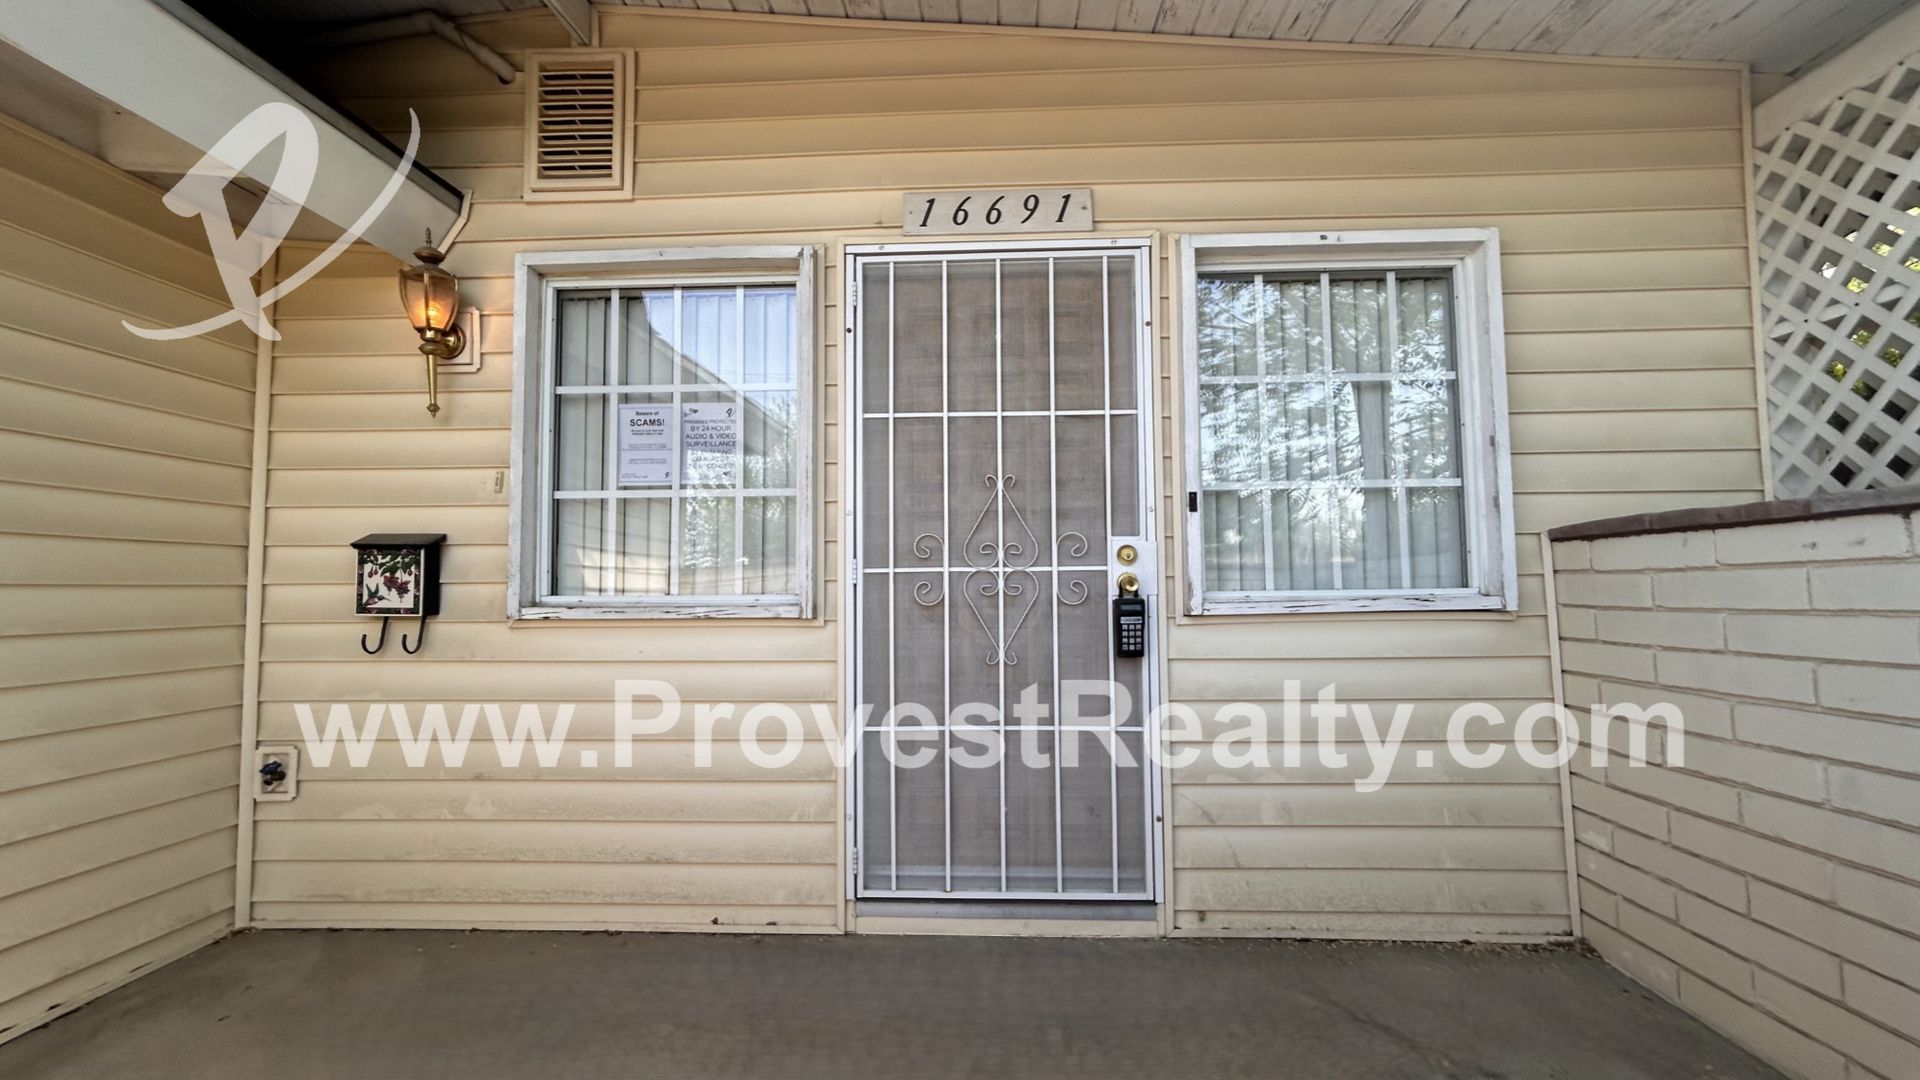 3 Bed, 1.5 Bath Victorville Home with a Bonus Room!